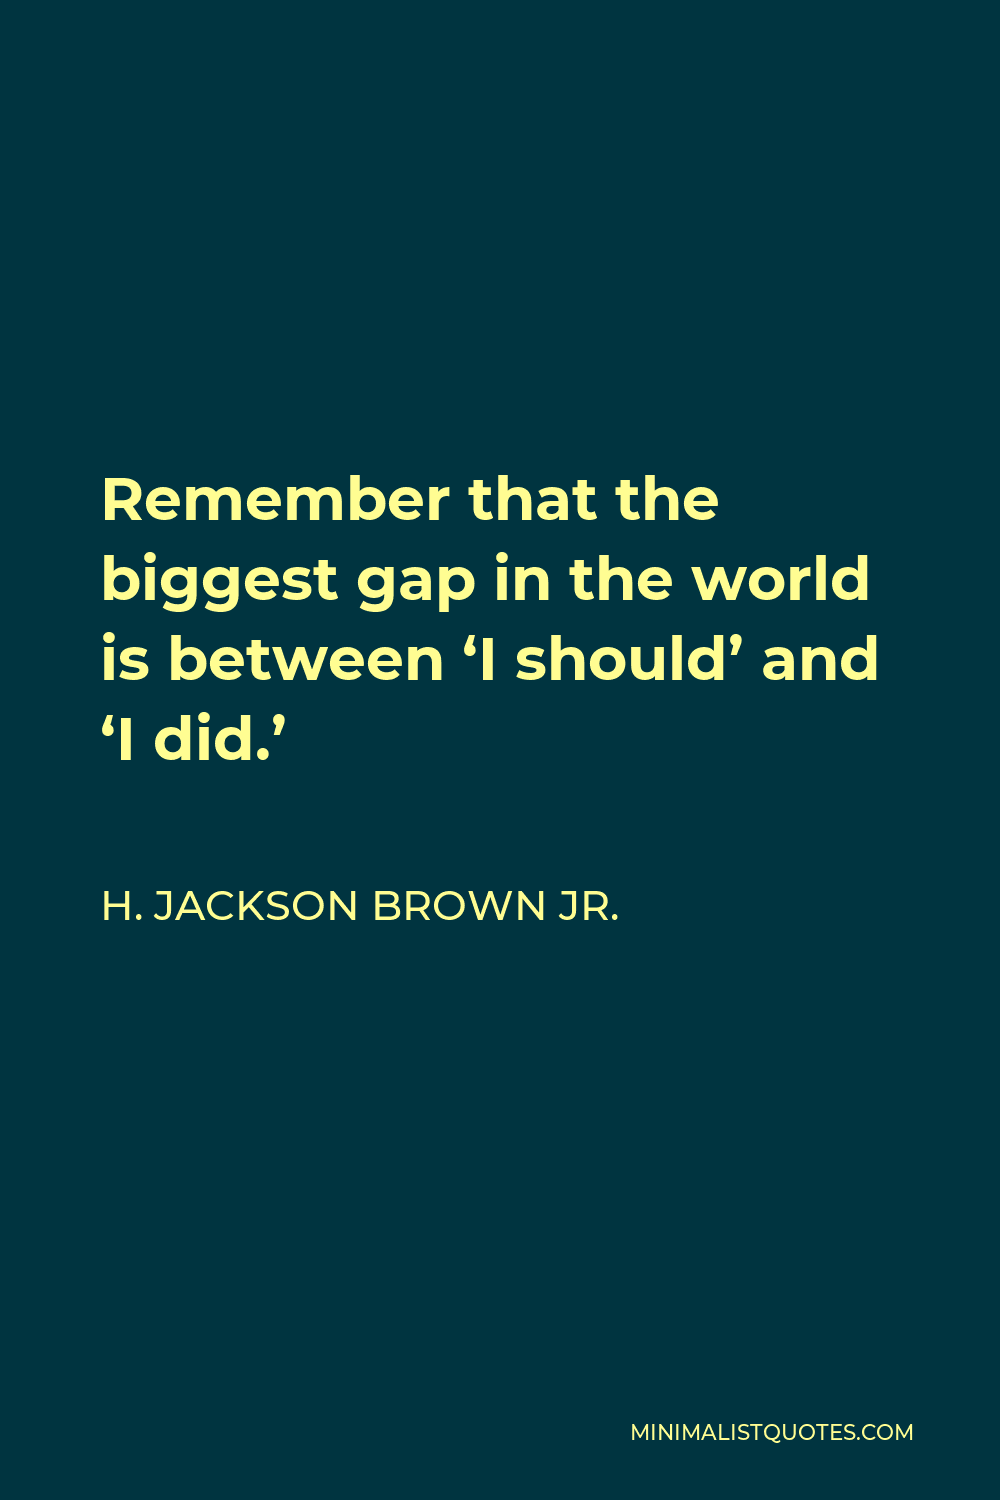 H. Jackson Brown Jr. Quote Remember that the biggest gap in the world